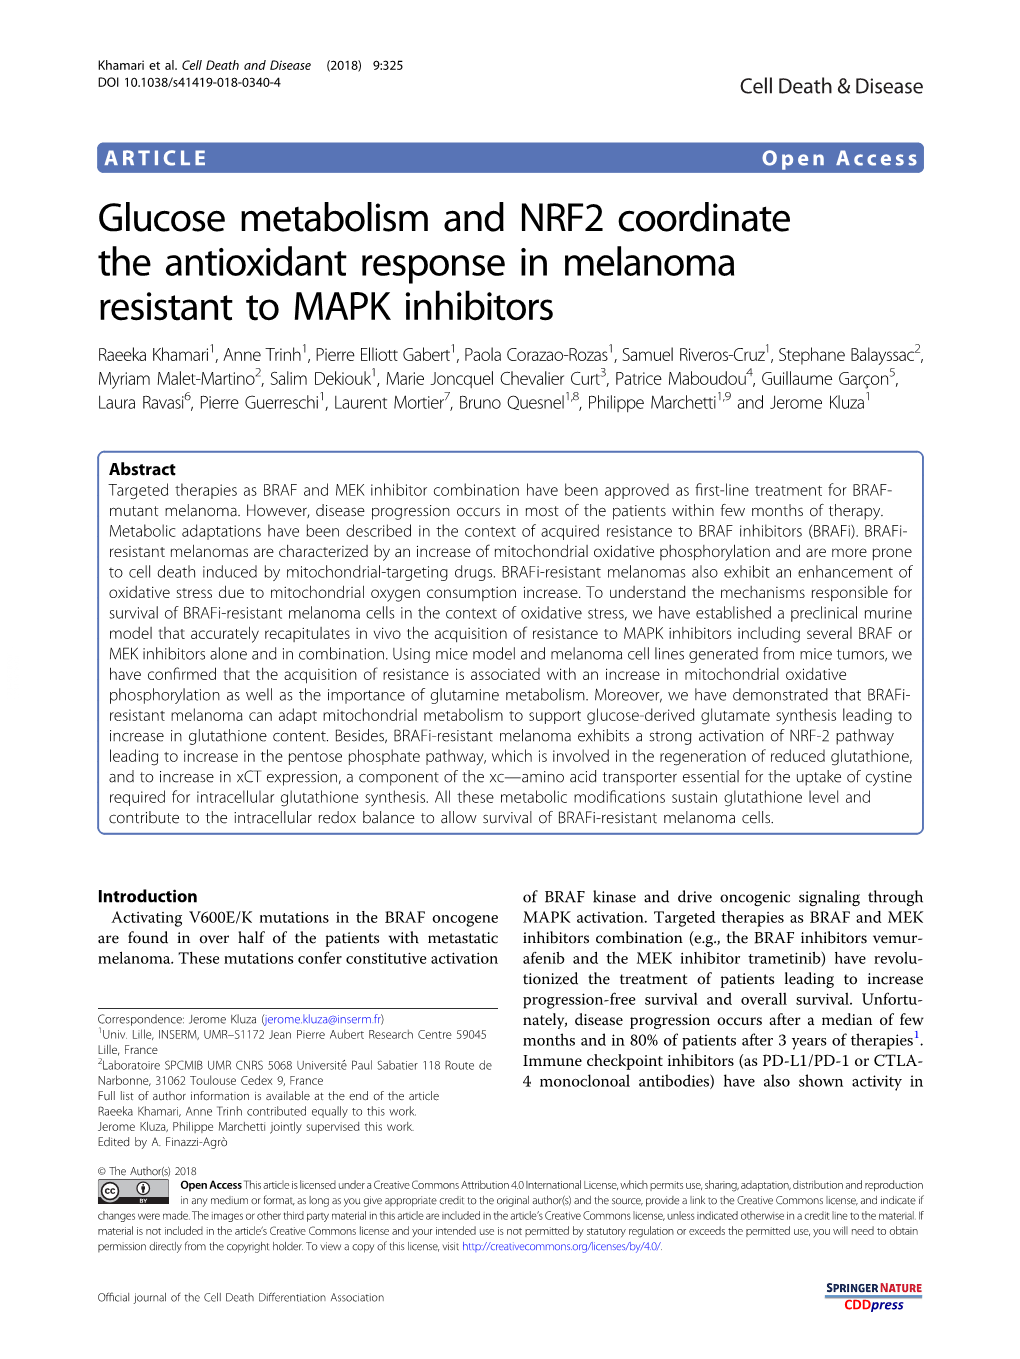 Glucose Metabolism and NRF2 Coordinate the Antioxidant Response in Melanoma Resistant to MAPK Inhibitors